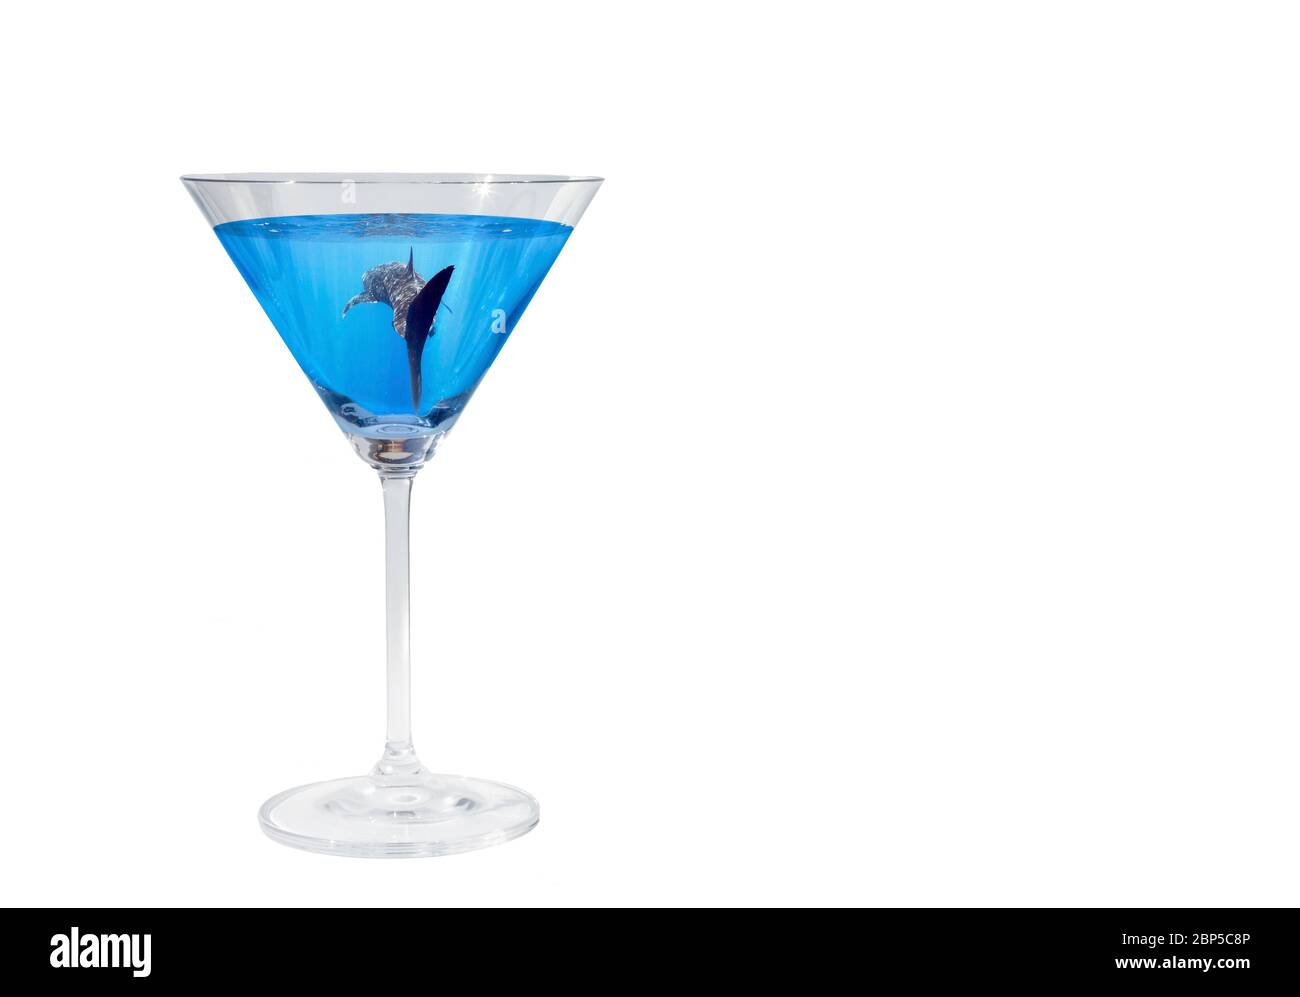 Sharktini: whale shark (Rhincodon typus) swimming in a martini glass against a transparent background, Pacific Ocean and United States, color Stock Photo